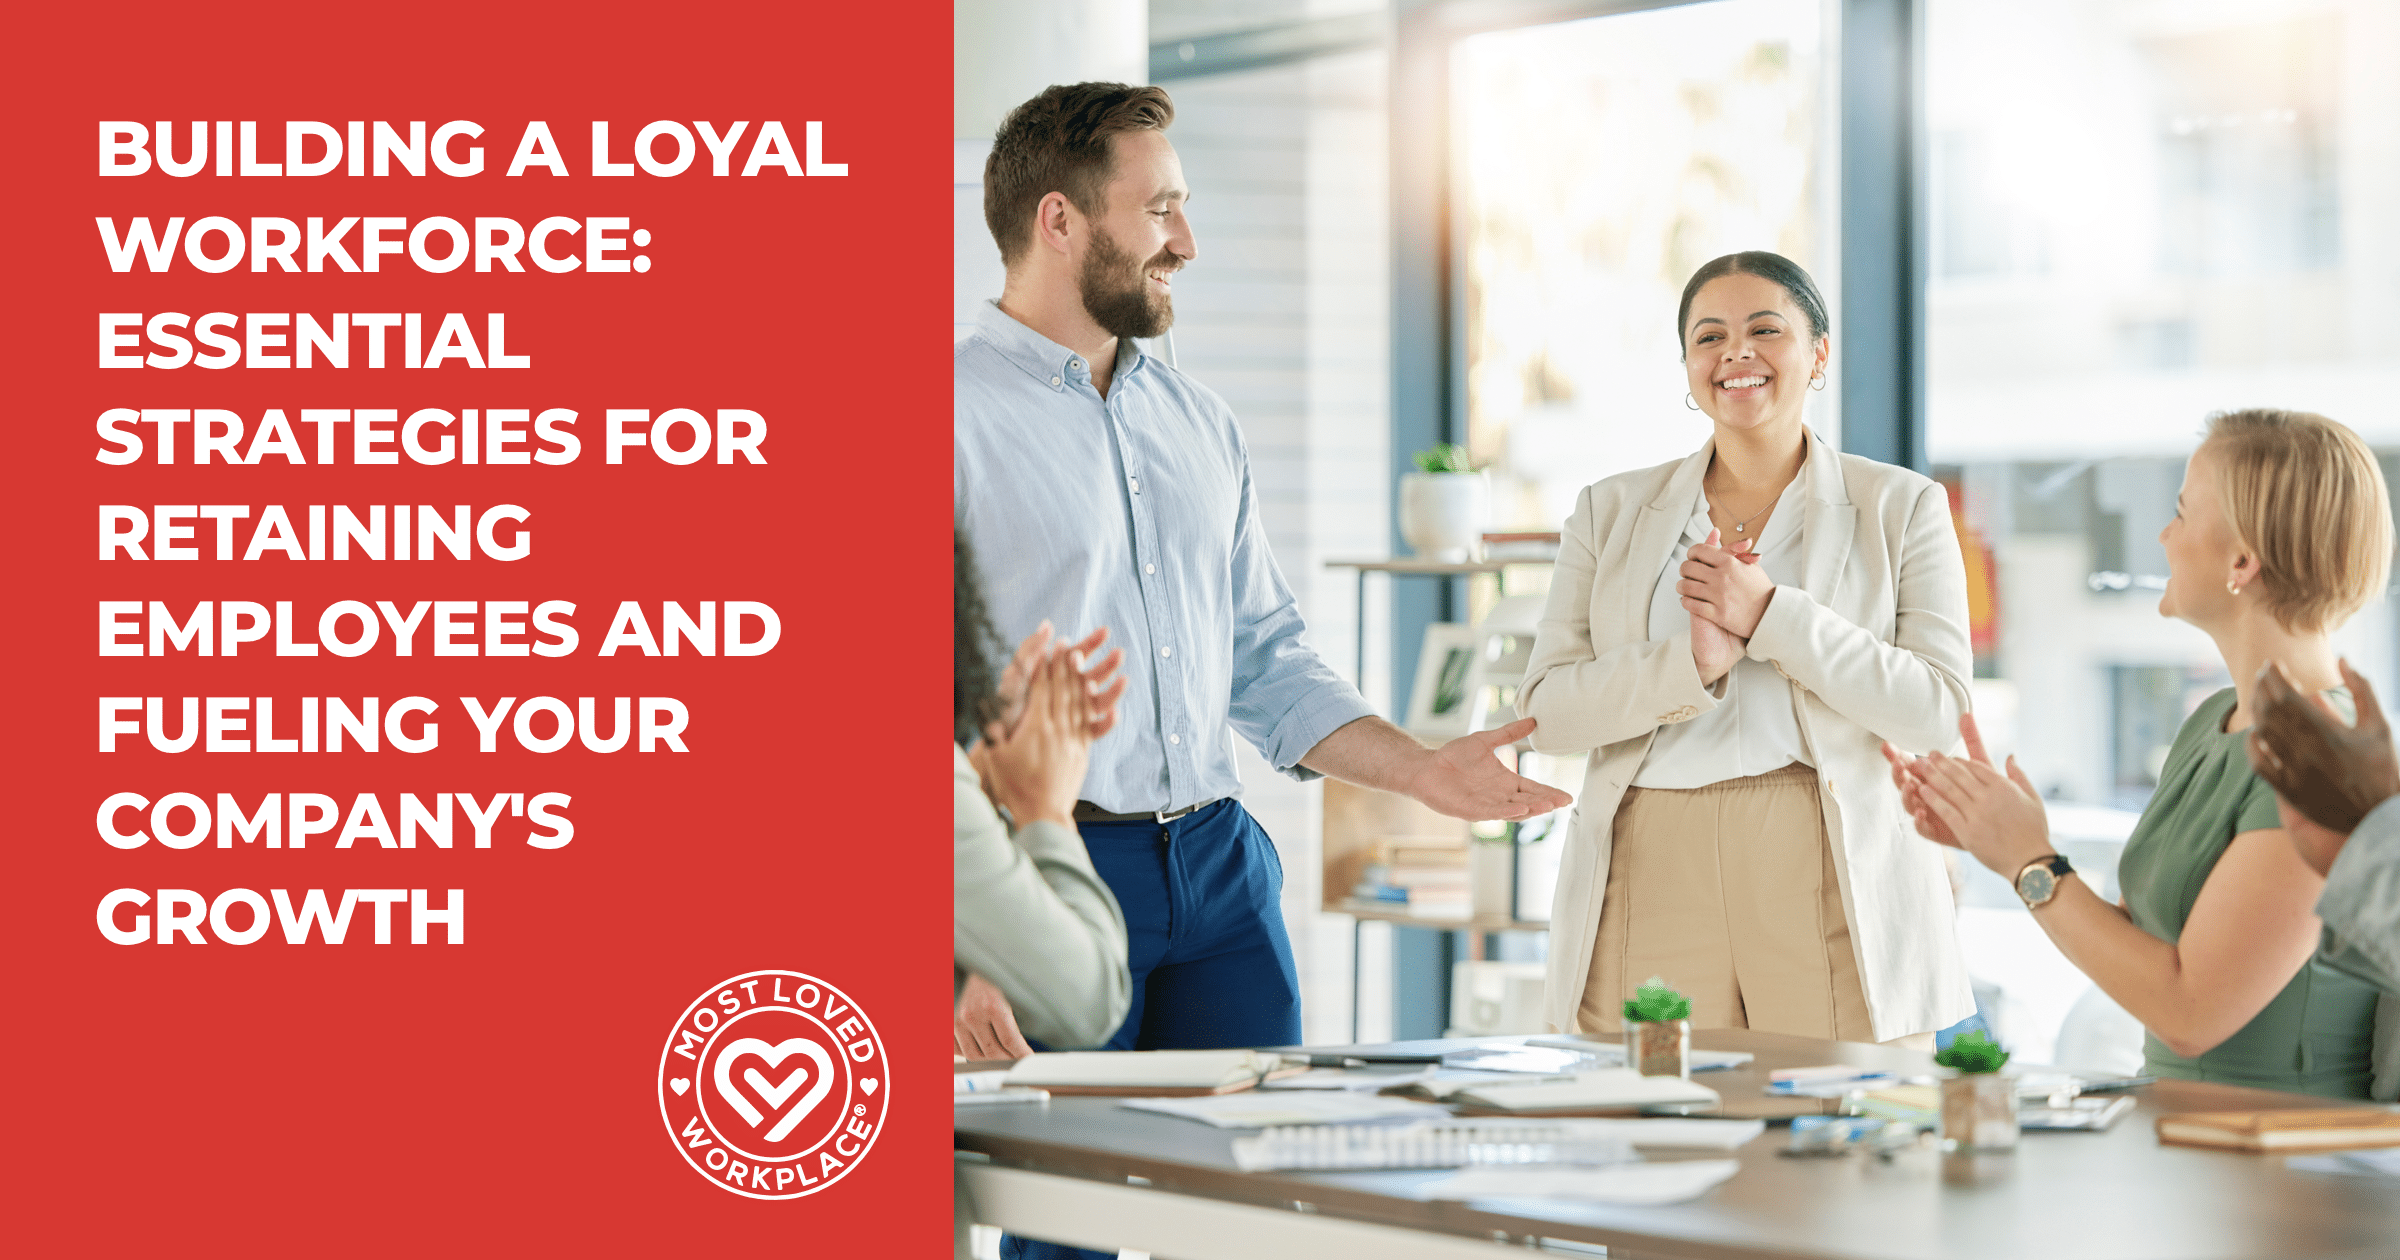 Building a Loyal Workforce- Essential Strategies for Retaining Employees and Fueling Your Company's Growth